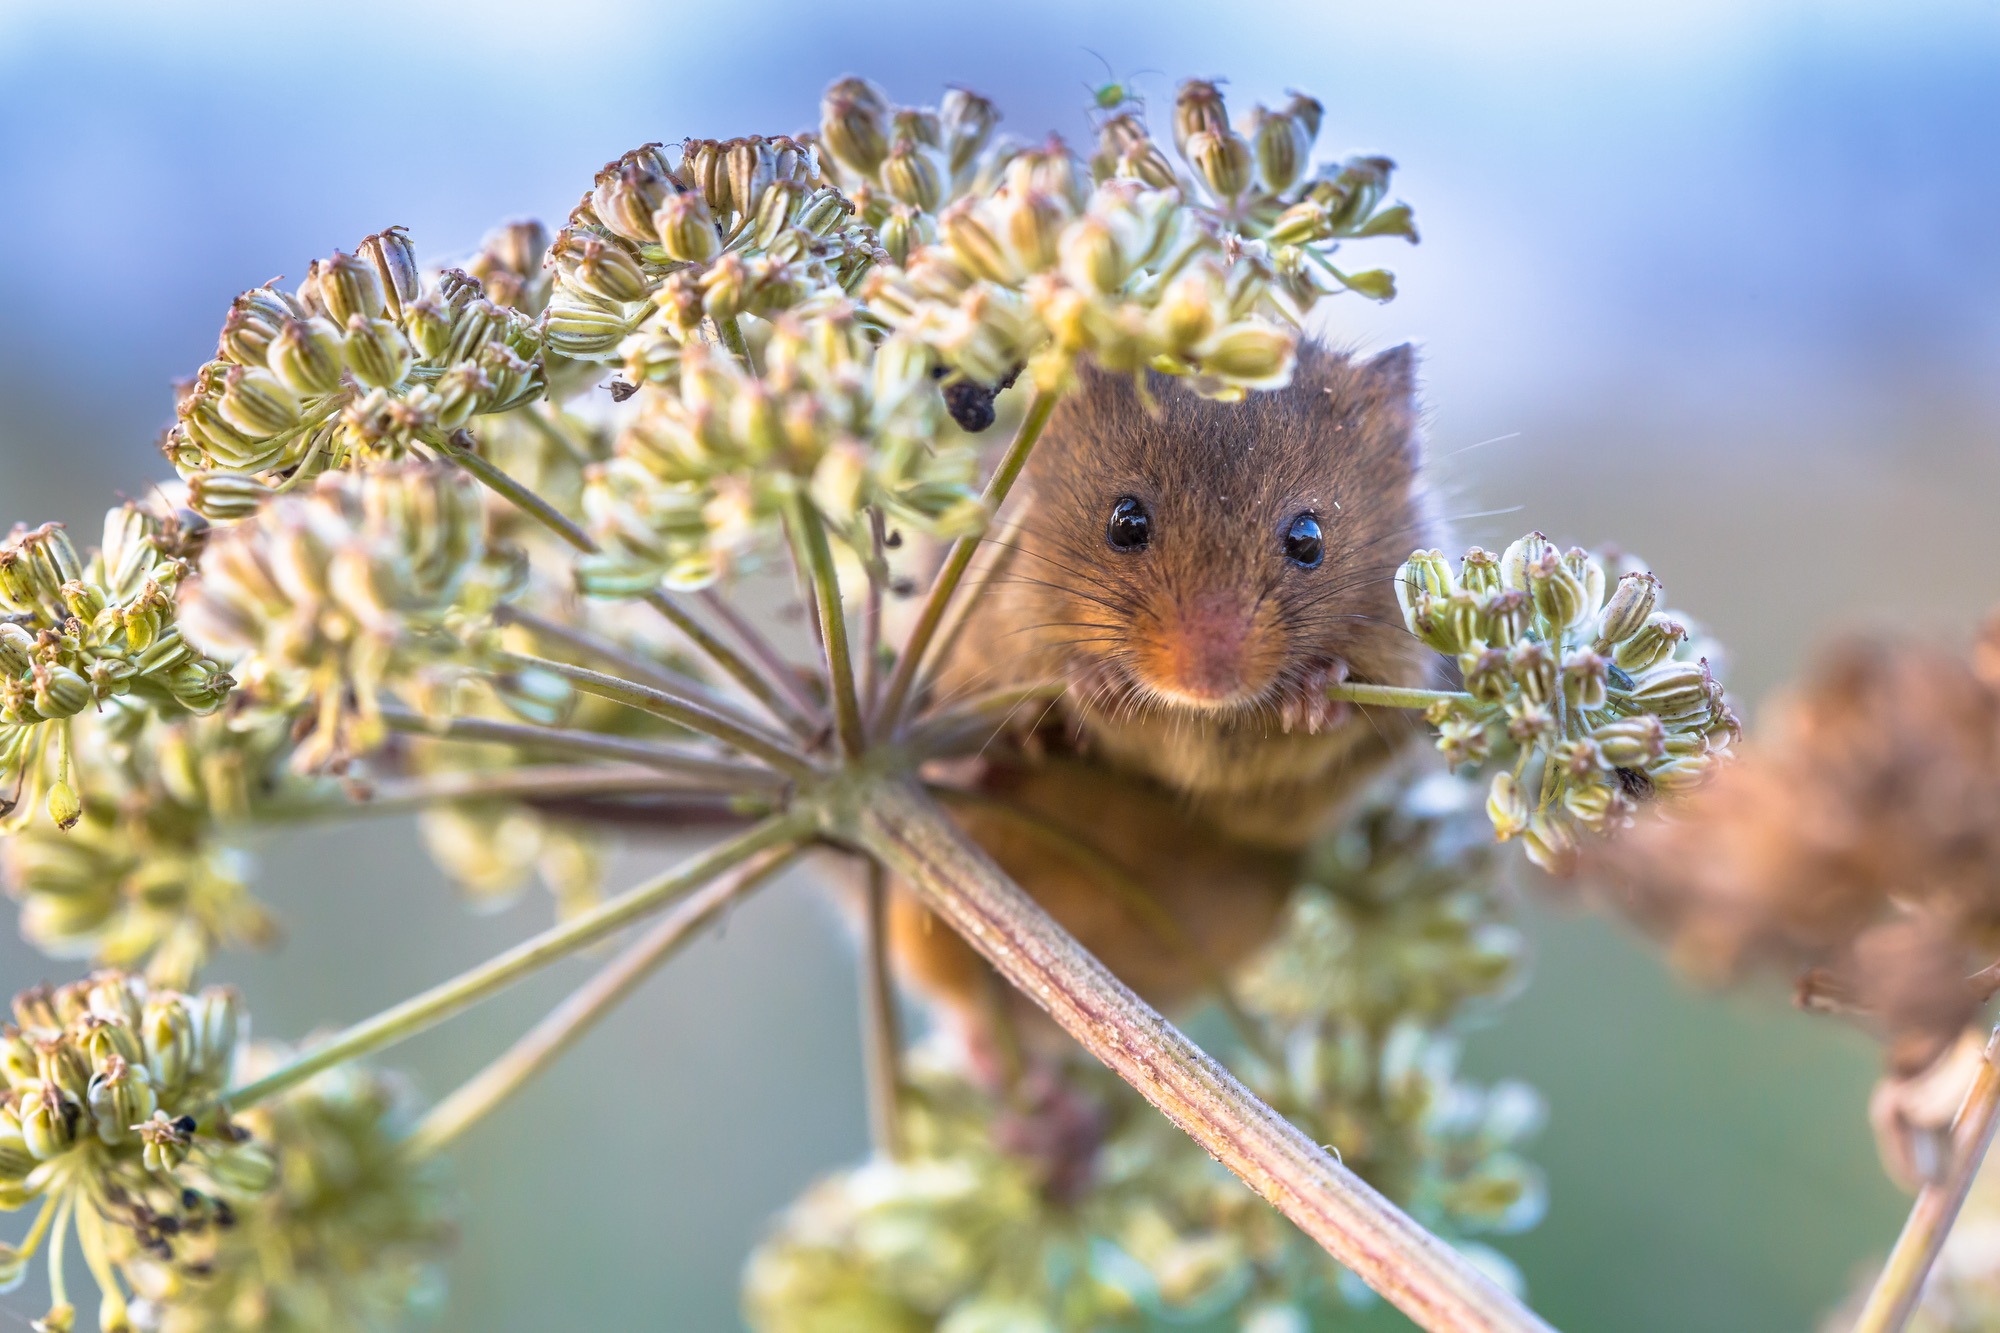 SS_Eurasian Harvest mouse (Micromys minutus) feeding on seeds of cow parsley (Anthriscus sylvestris) and looking in the camera